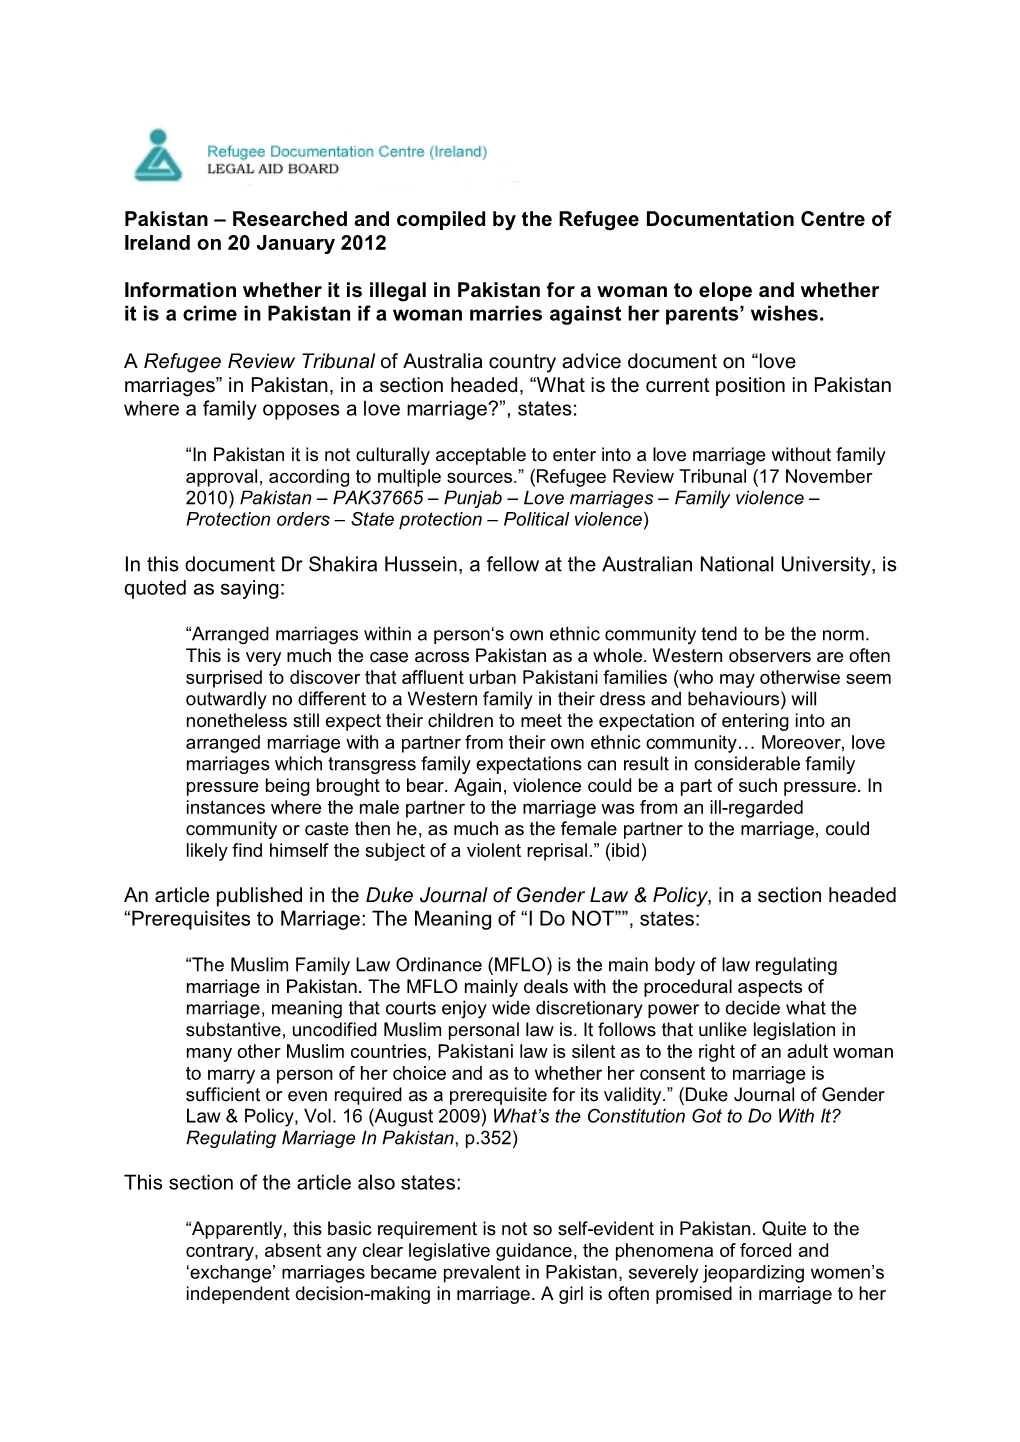 Pakistan – Researched and Compiled by the Refugee Documentation Centre of Ireland on 20 January 2012